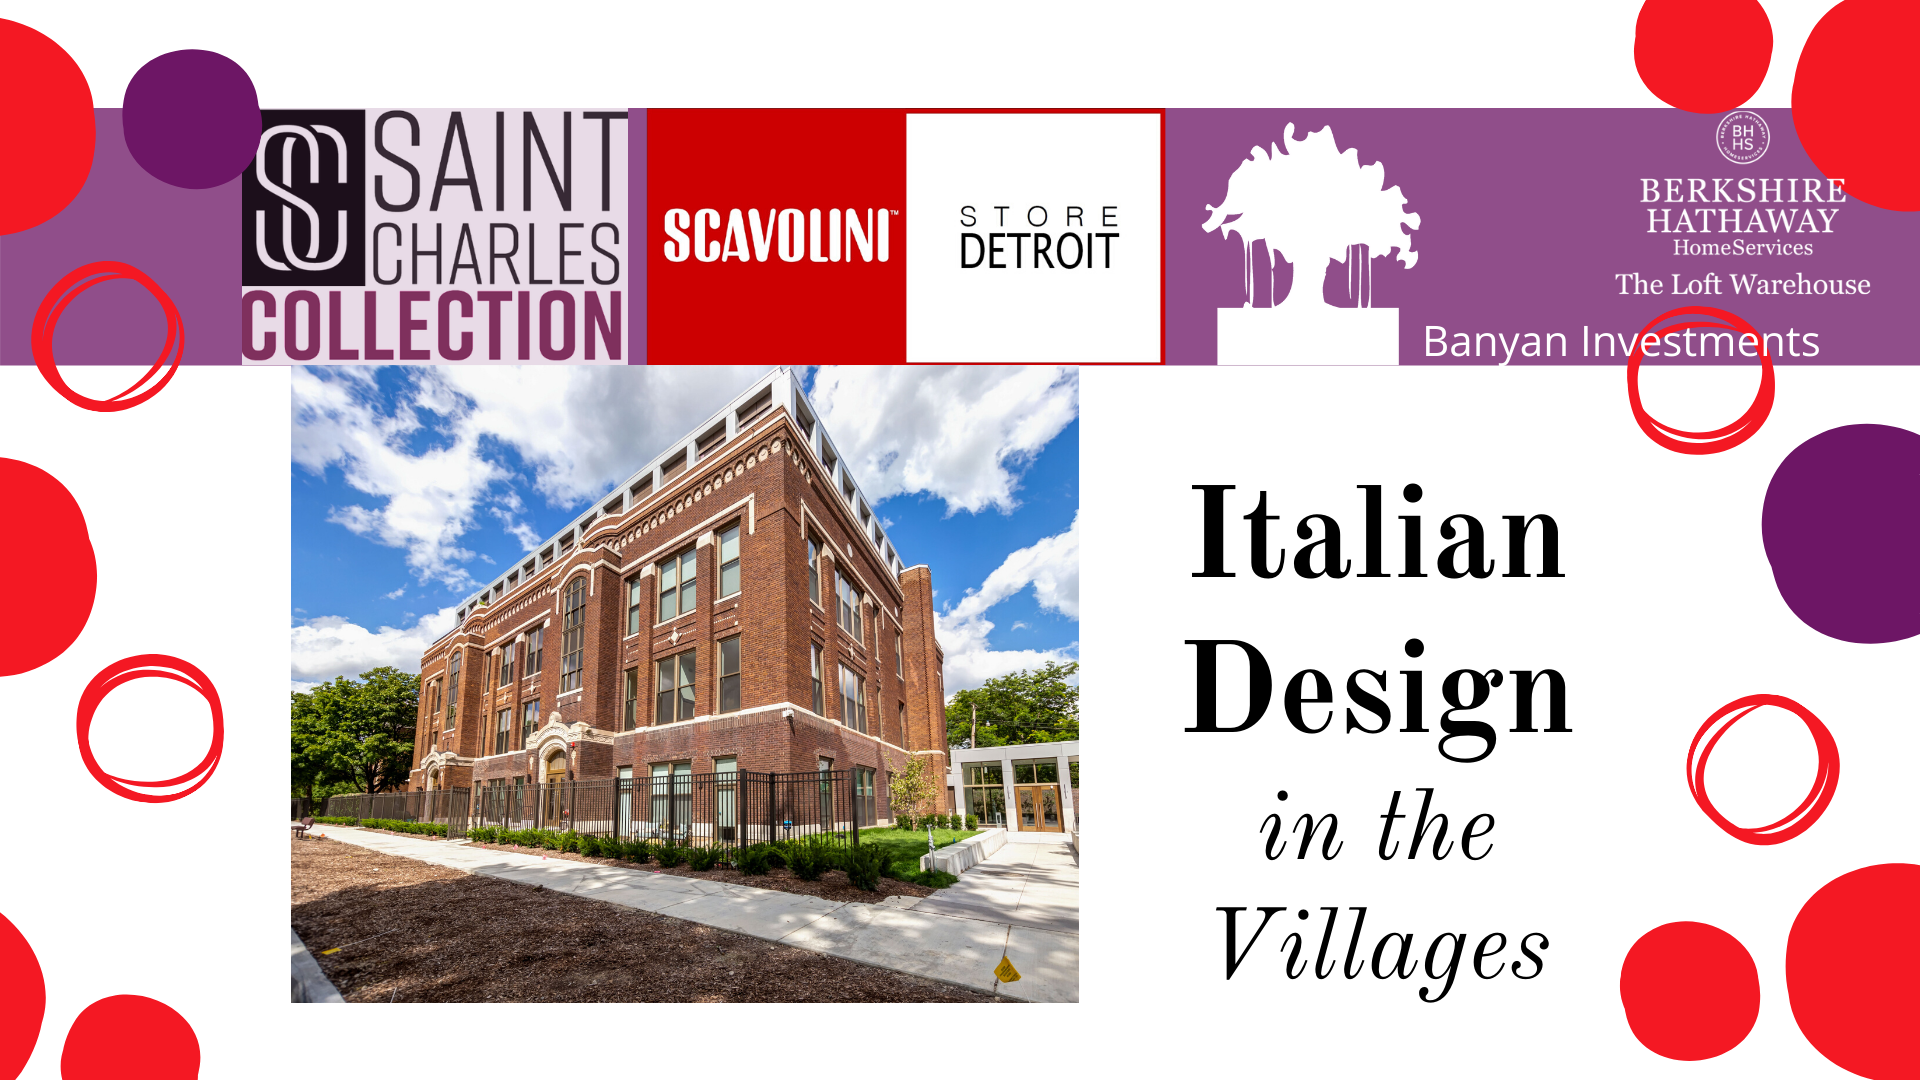 Italian Design in the Villages - Reception for Saint Charles Collection